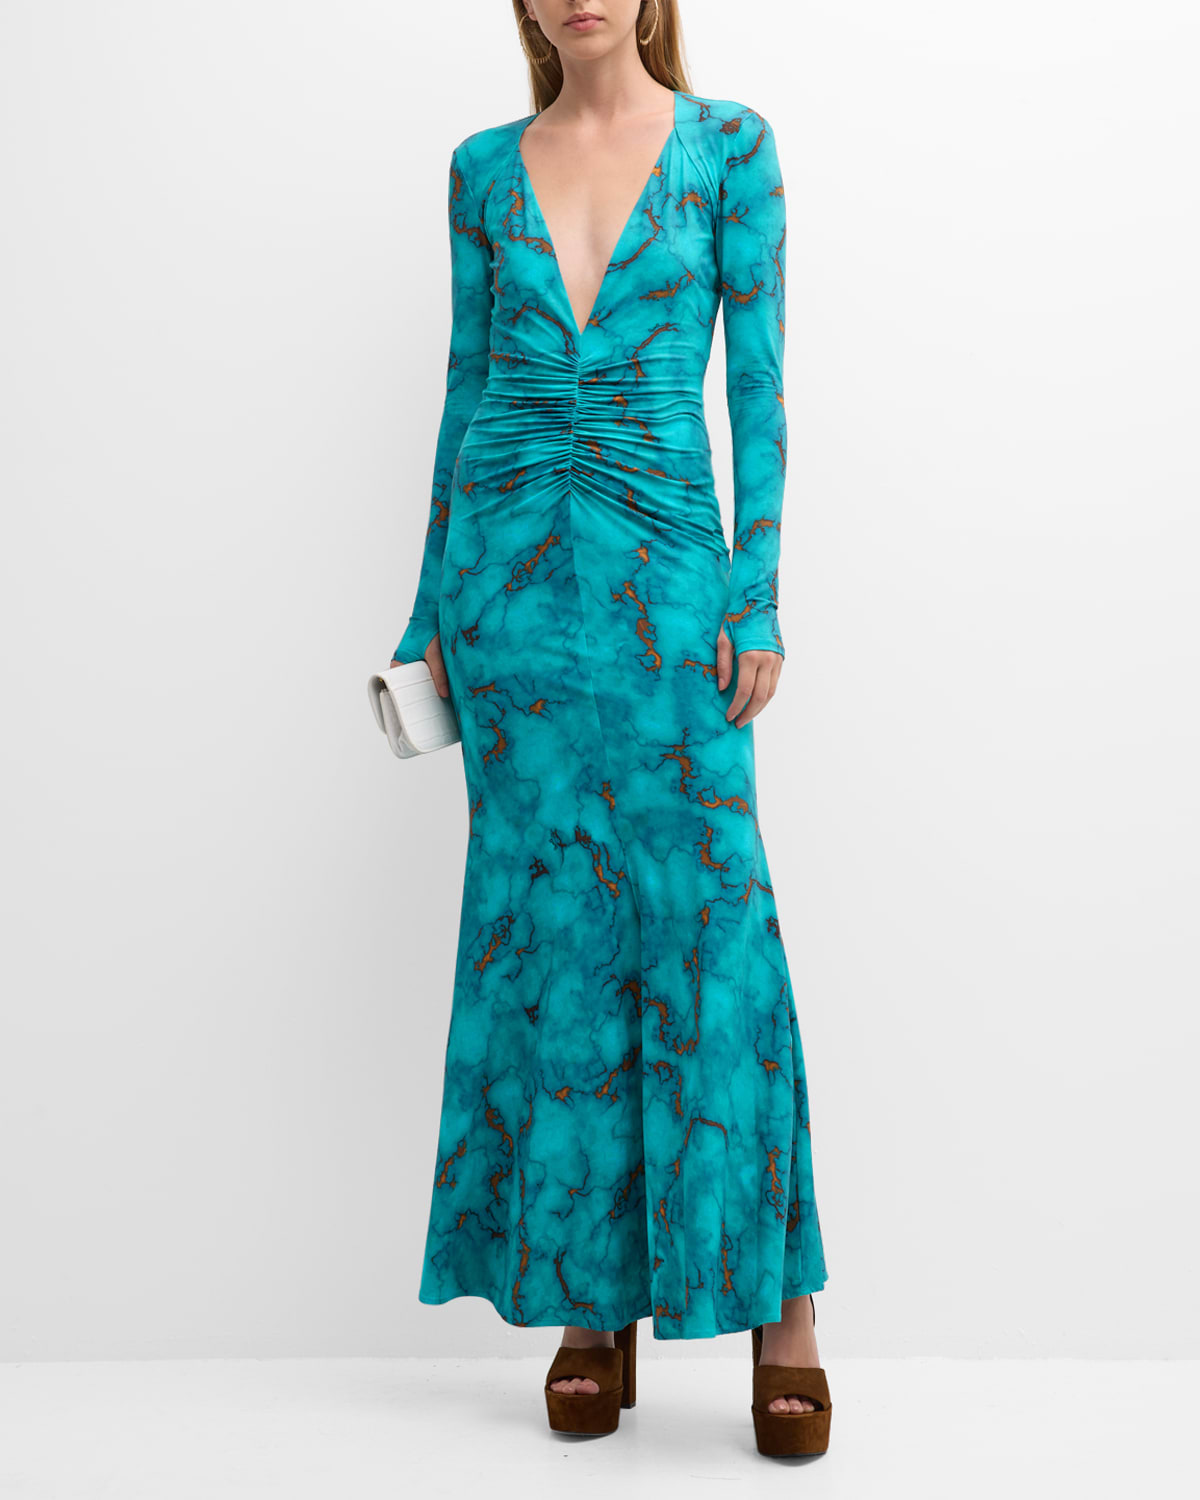 ROBERTO CAVALLI PLUNGING MARBLE-PRINT RUCHED OPEN-BACK MAXI DRESS